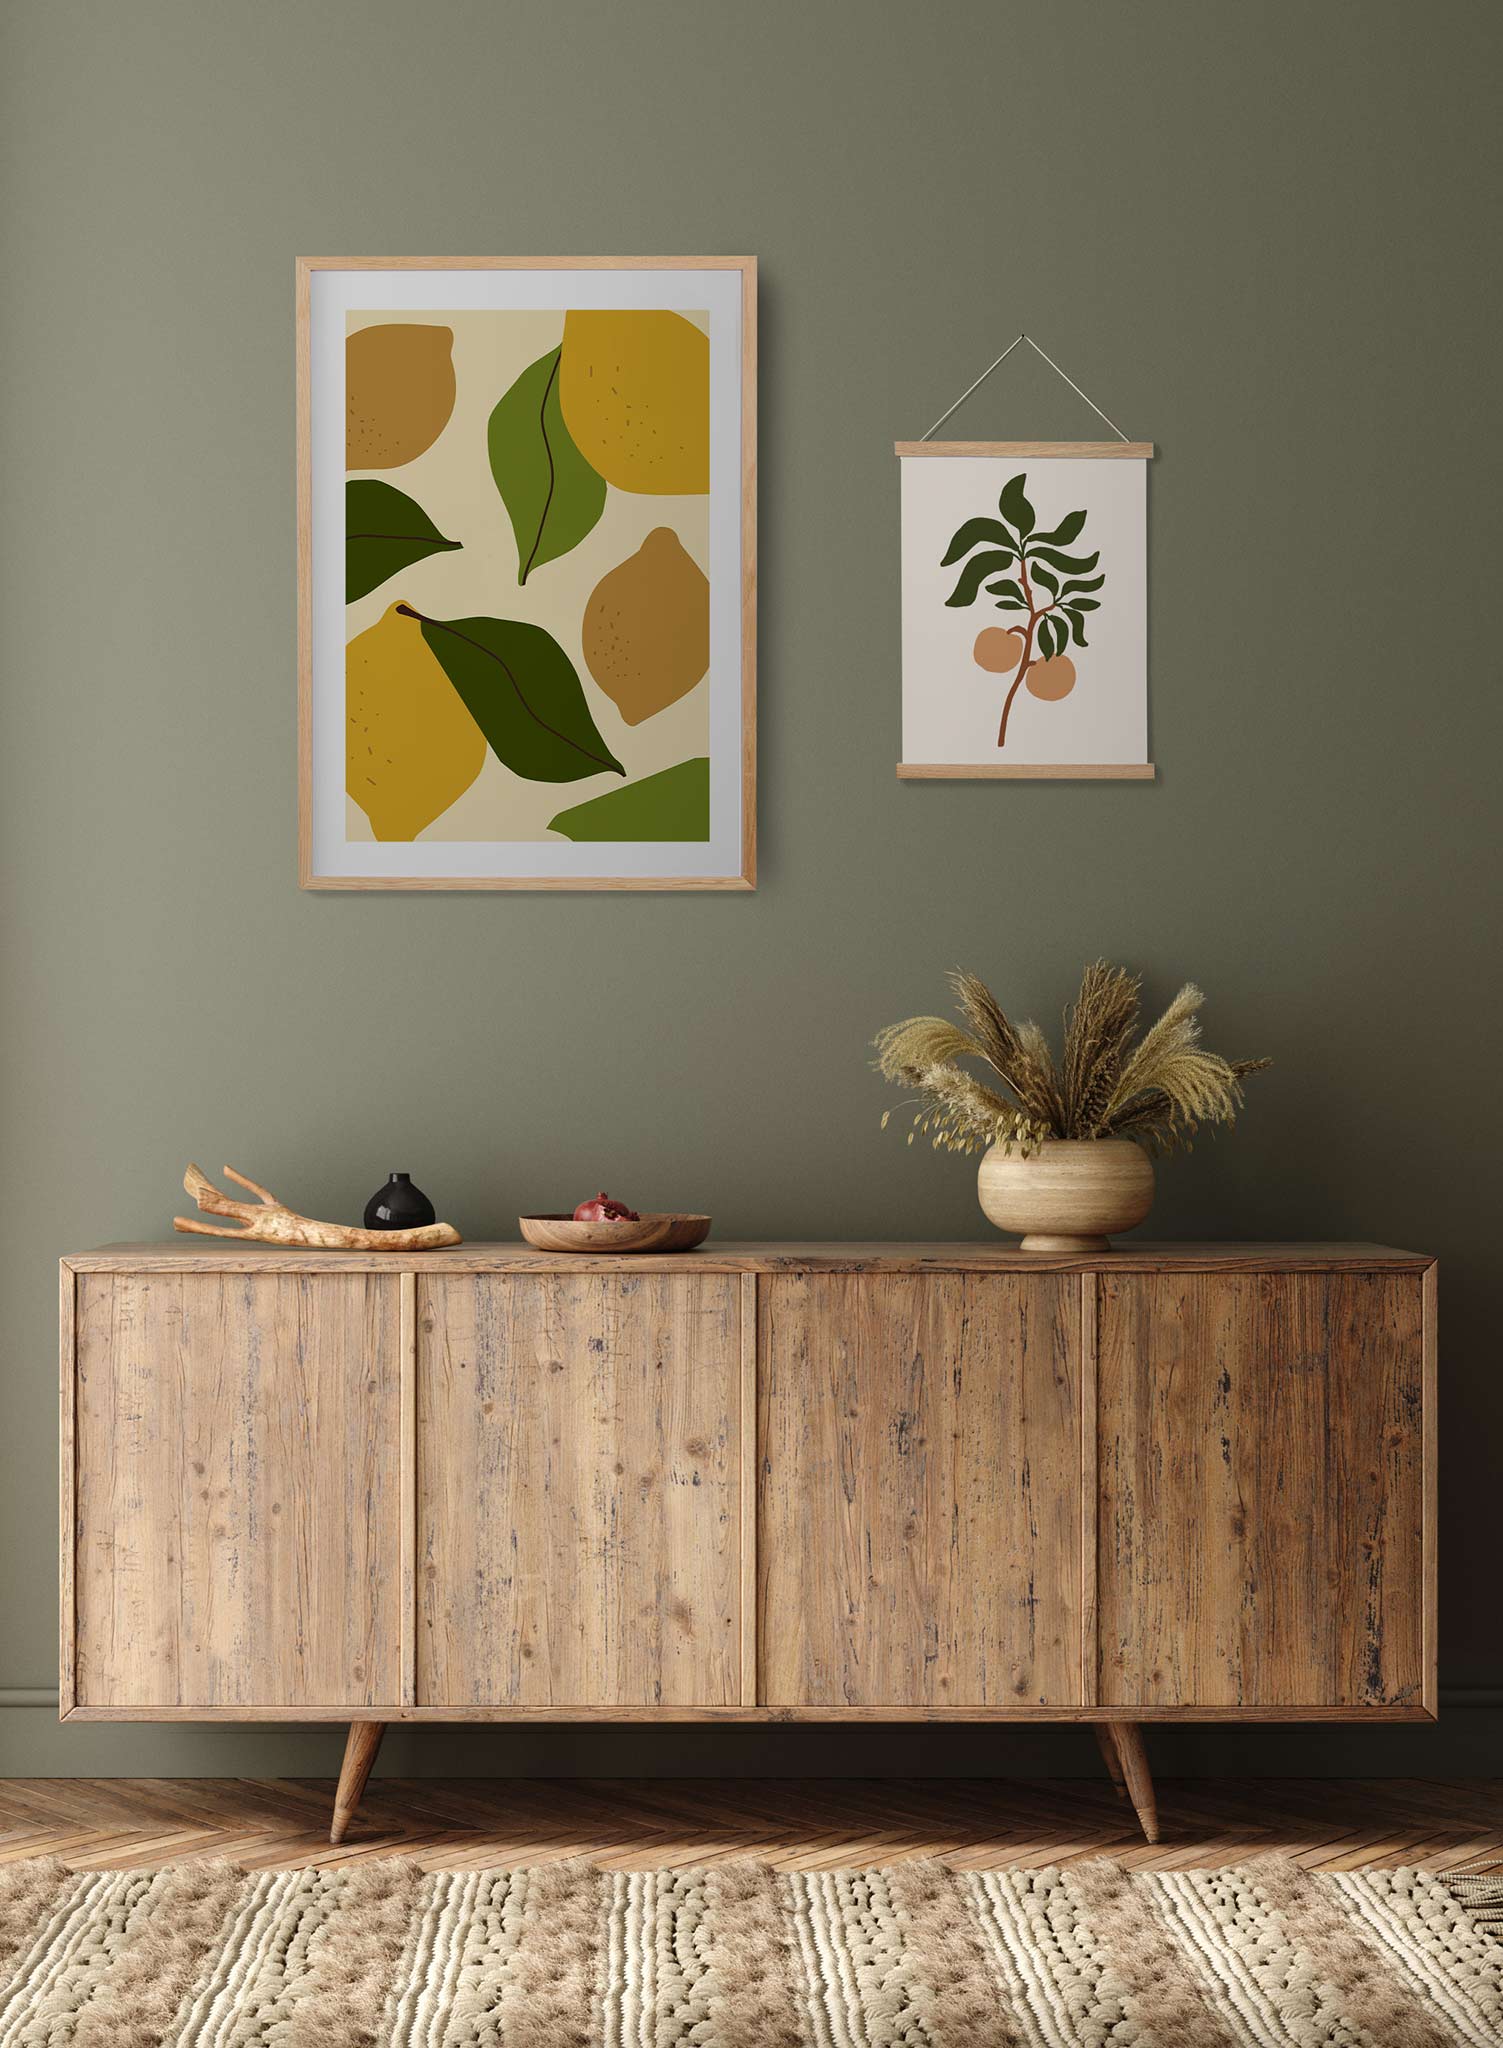 Lemon Party is a citrus illustration poster by Opposite Wall.